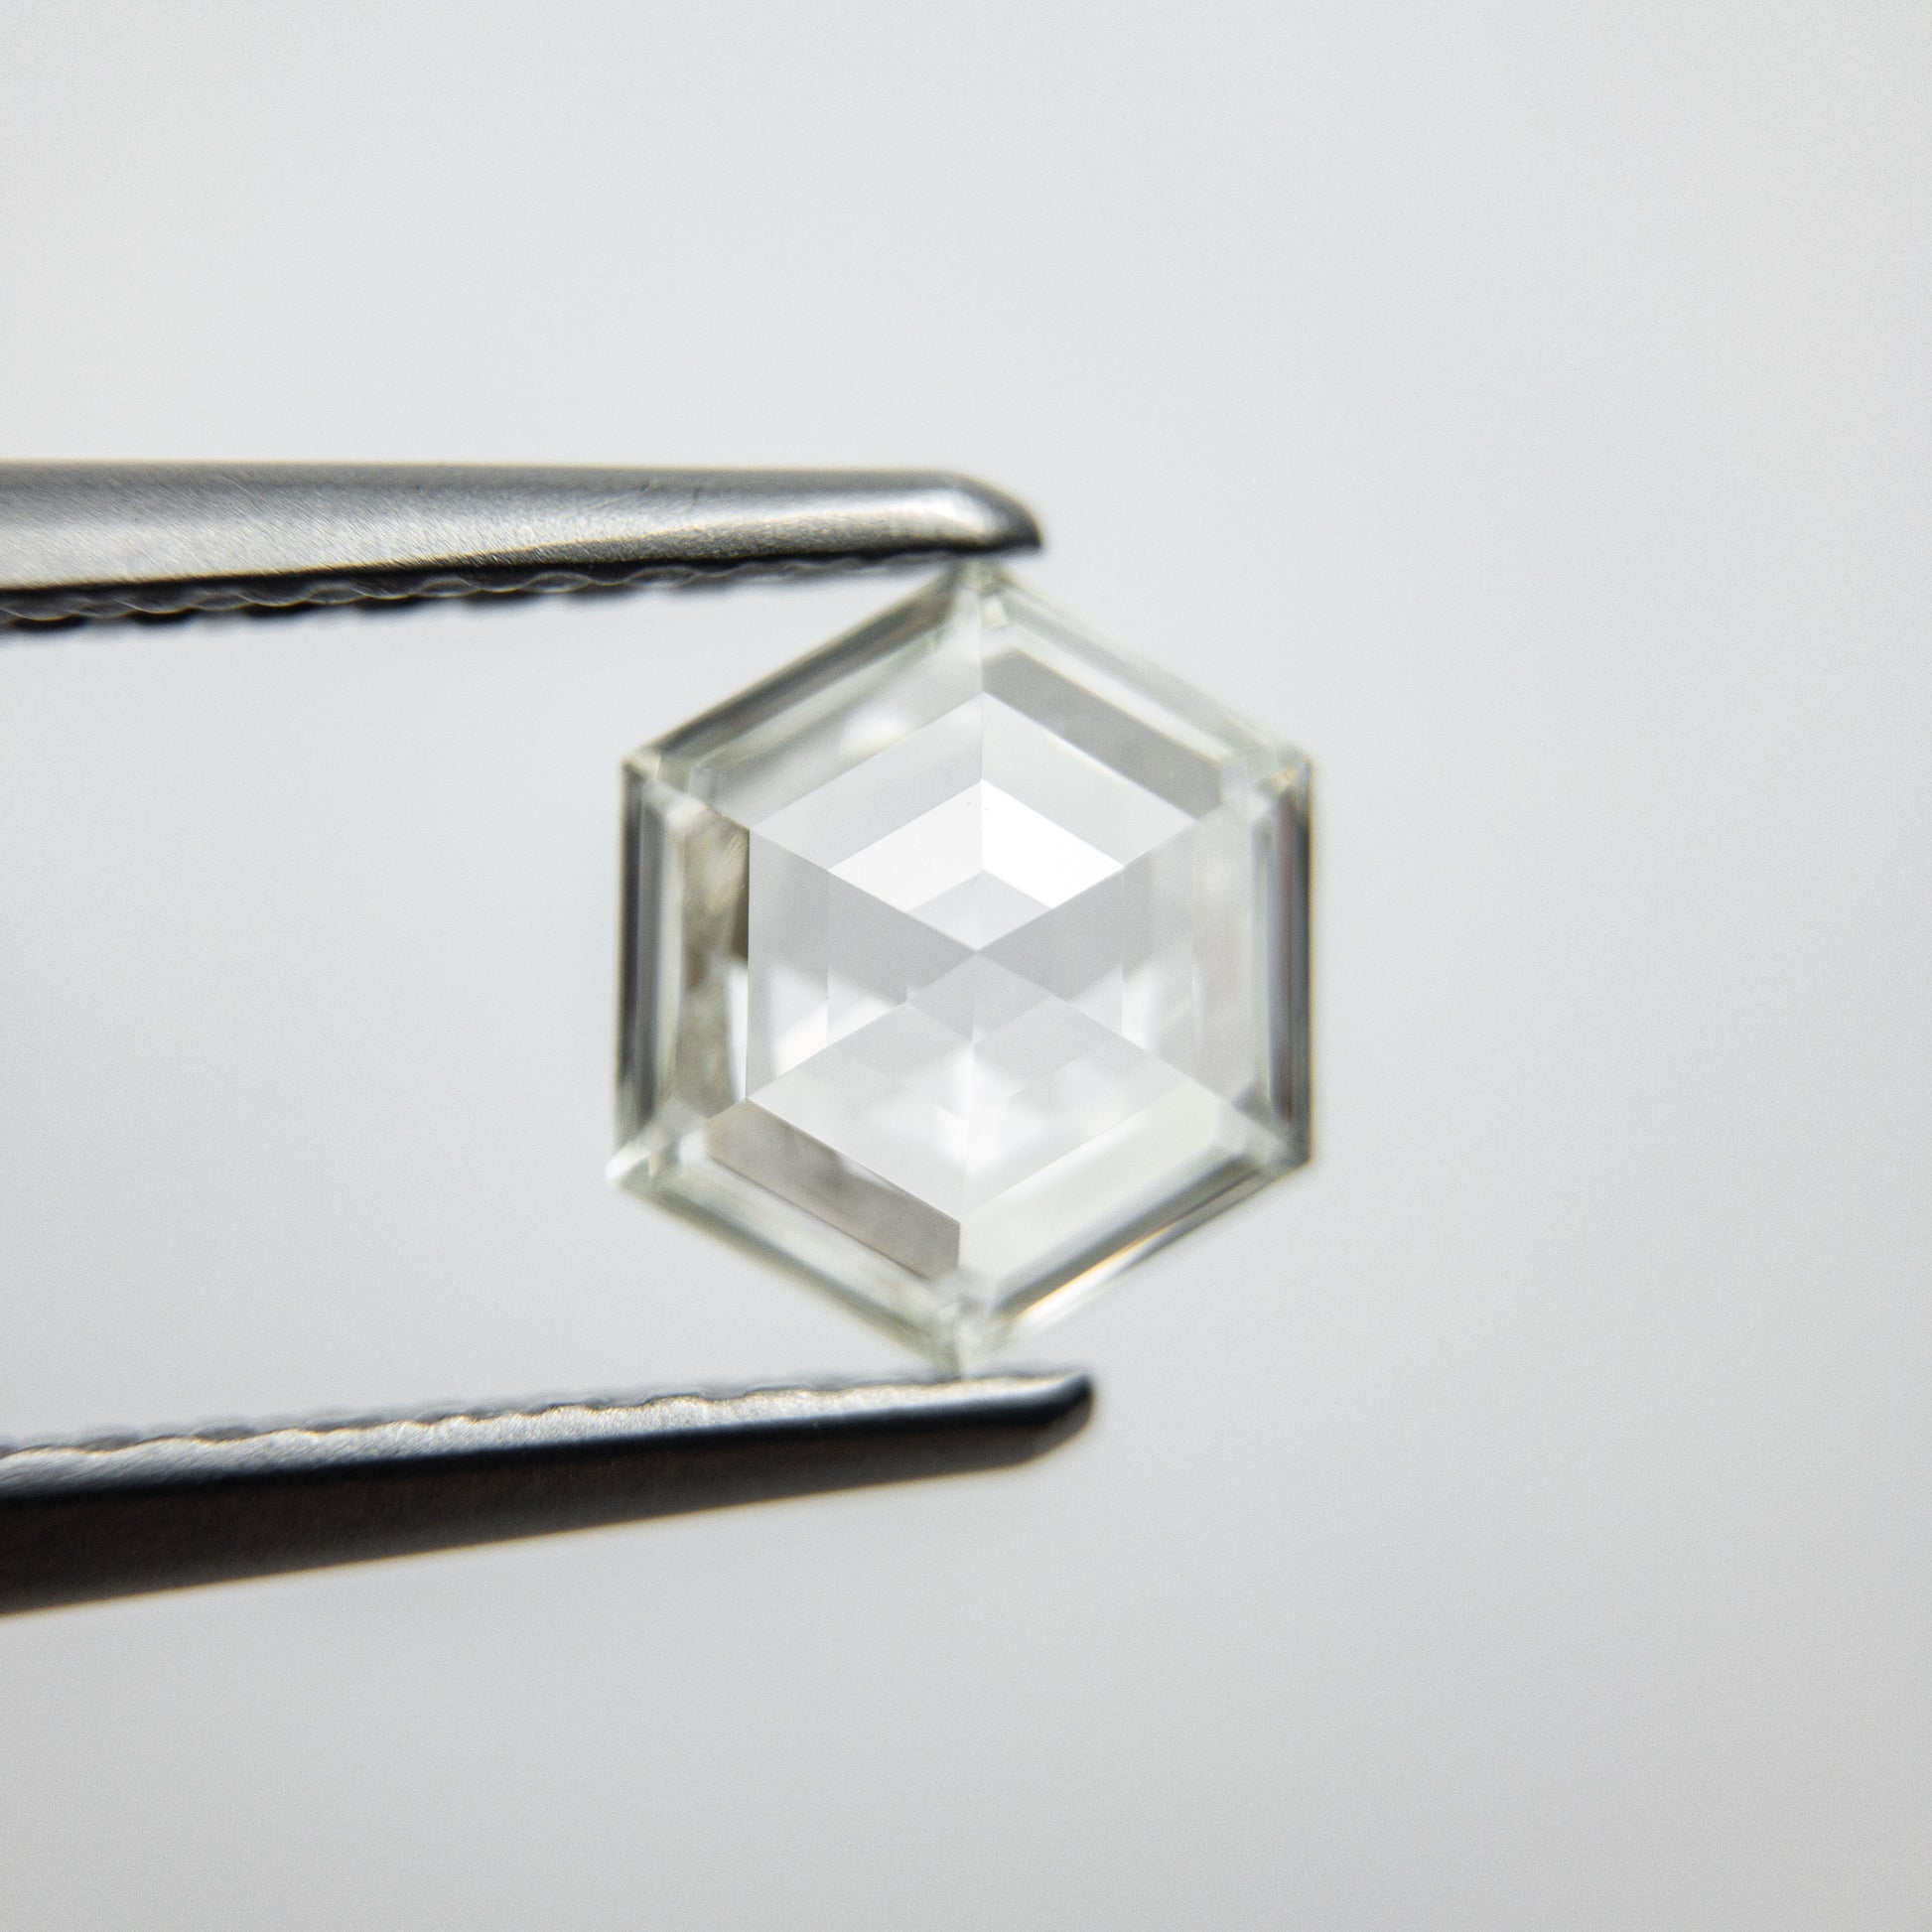 .77 carat Natural Diamond Clear White Hexagon Geometric Diamond for custom work - Inventory code HEXWC77 - Midwinter Co. Alternative Bridal Rings and Modern Fine Jewelry